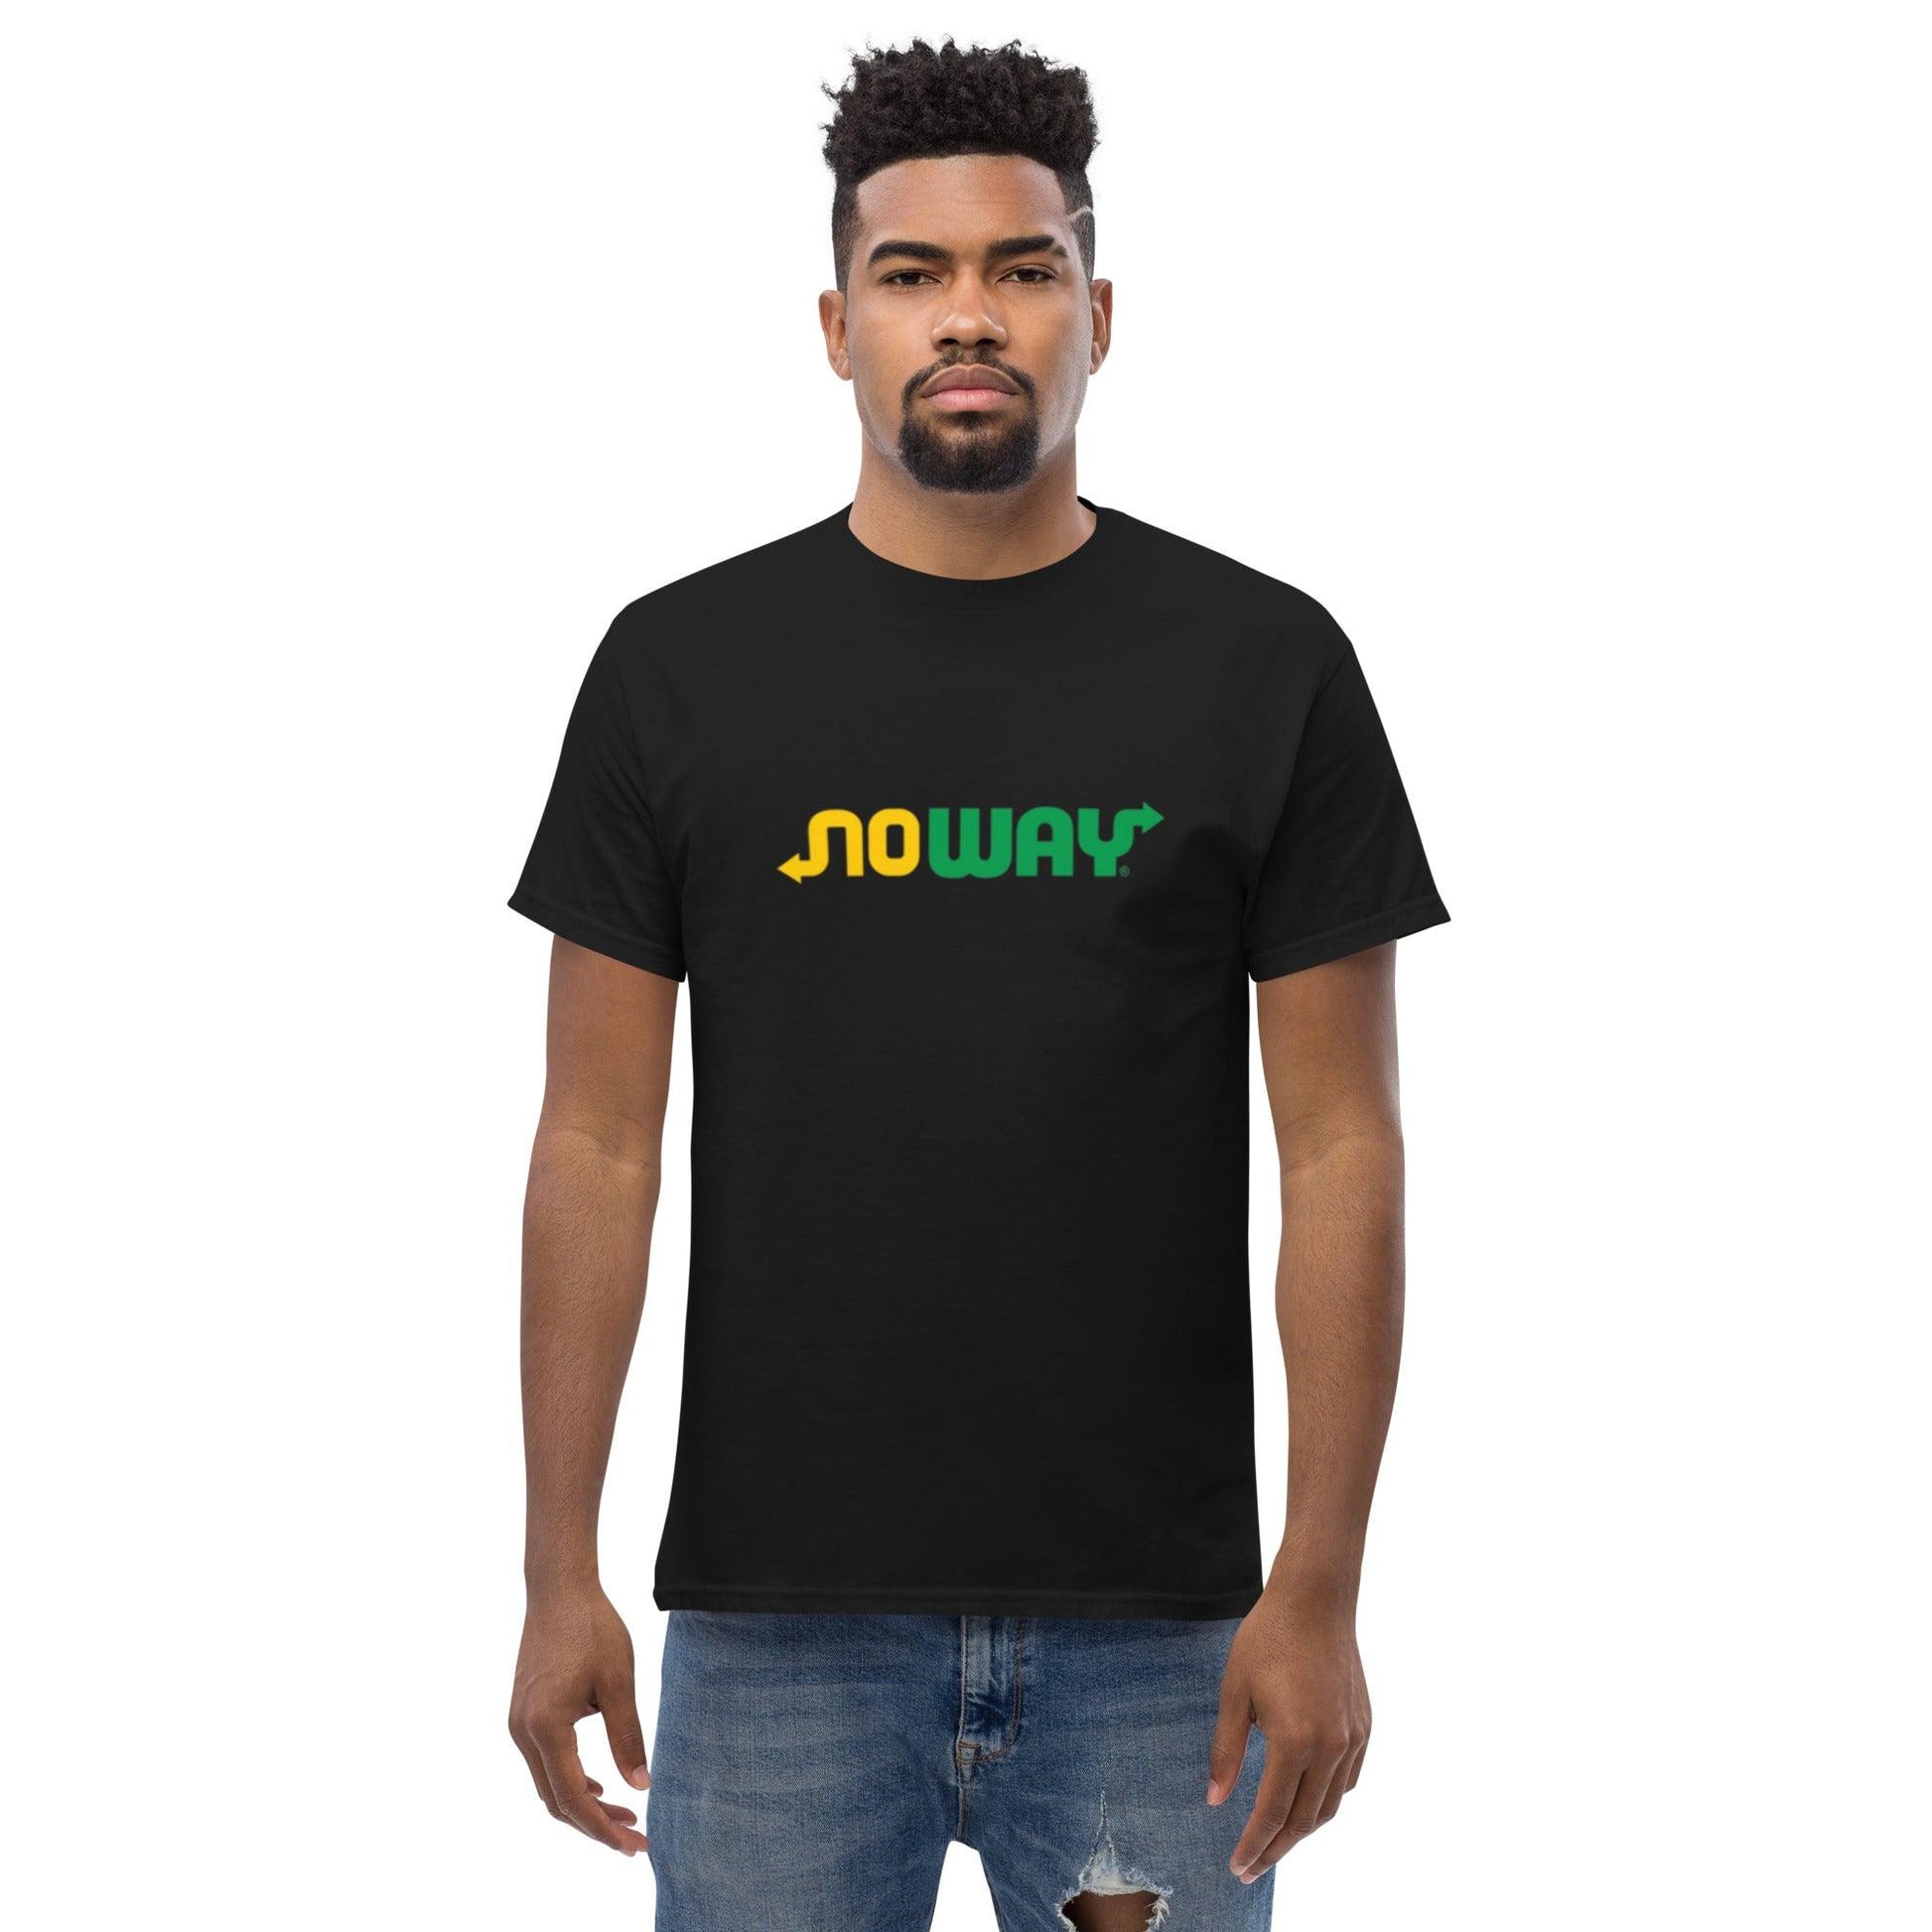 NOWAY - Anarchyca-clothing